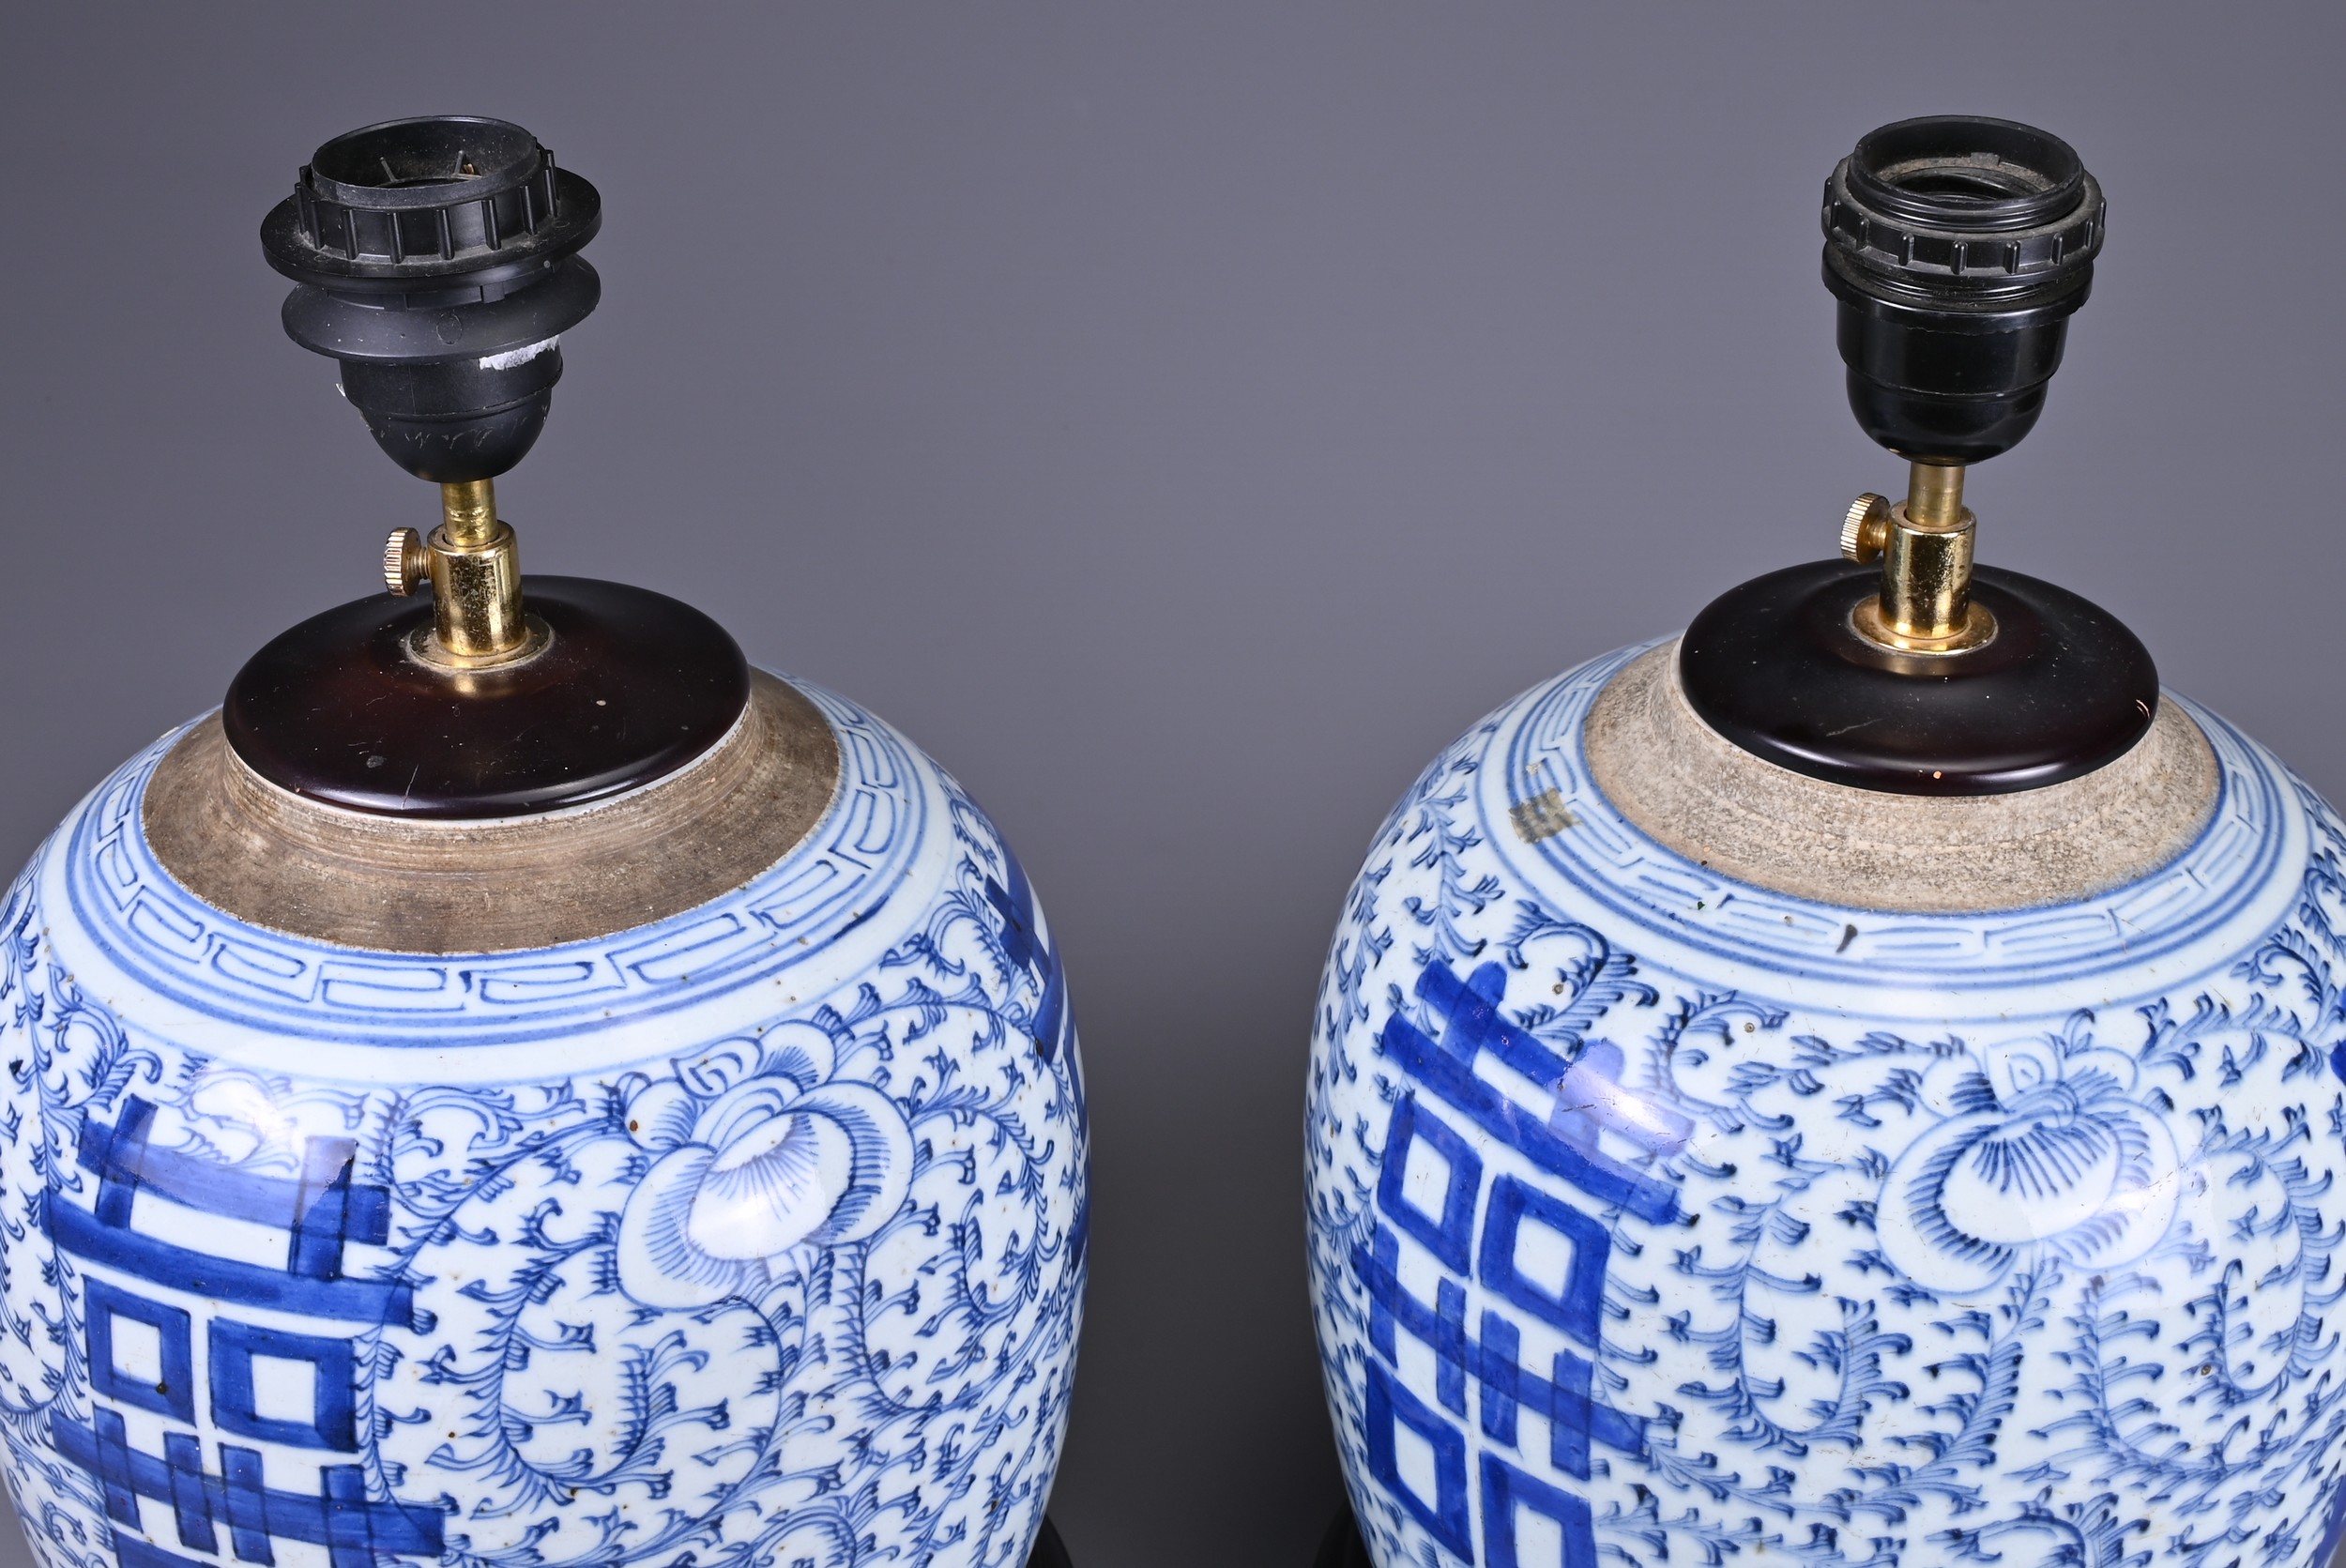 A PAIR OF 19TH CENTURY CHINESE PORCELAIN GINGER JARS MOUNTED AS LAMPS. Each decorated with scrolling - Image 4 of 5